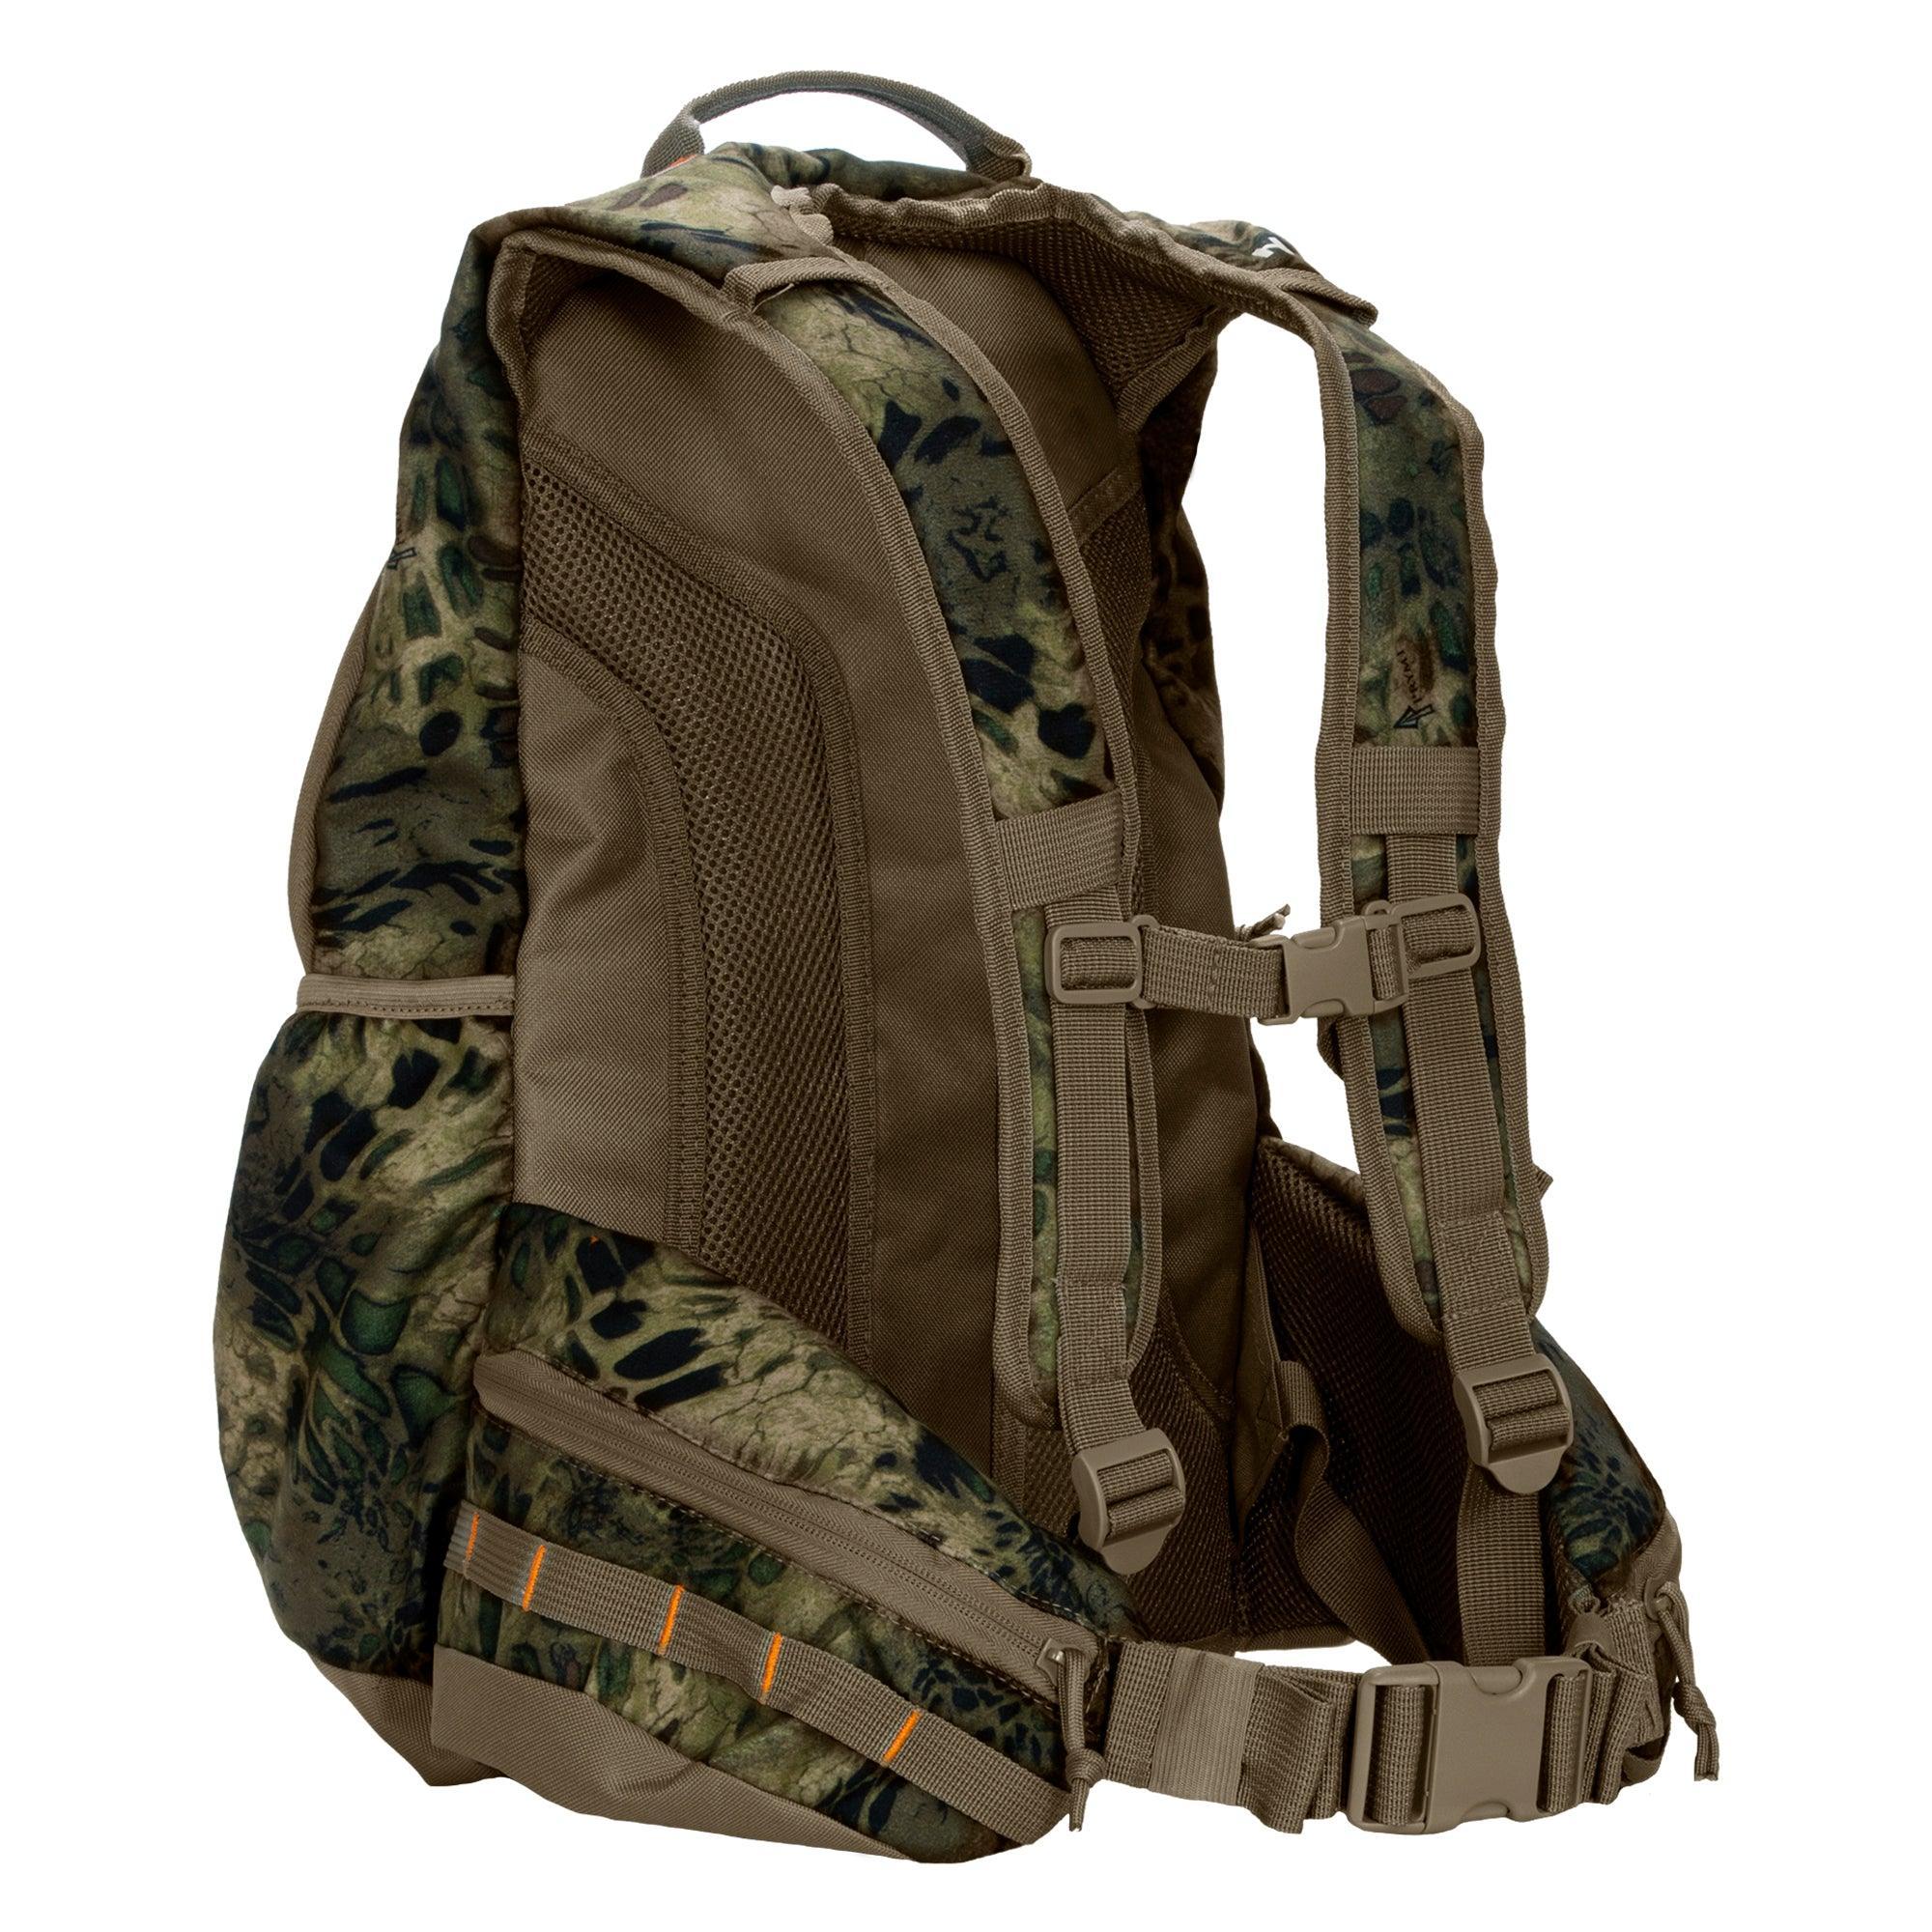 NORTH MOUNTAIN GEAR BACKPACK - PRYM1 - WOODLANDS – North Mountain Gear